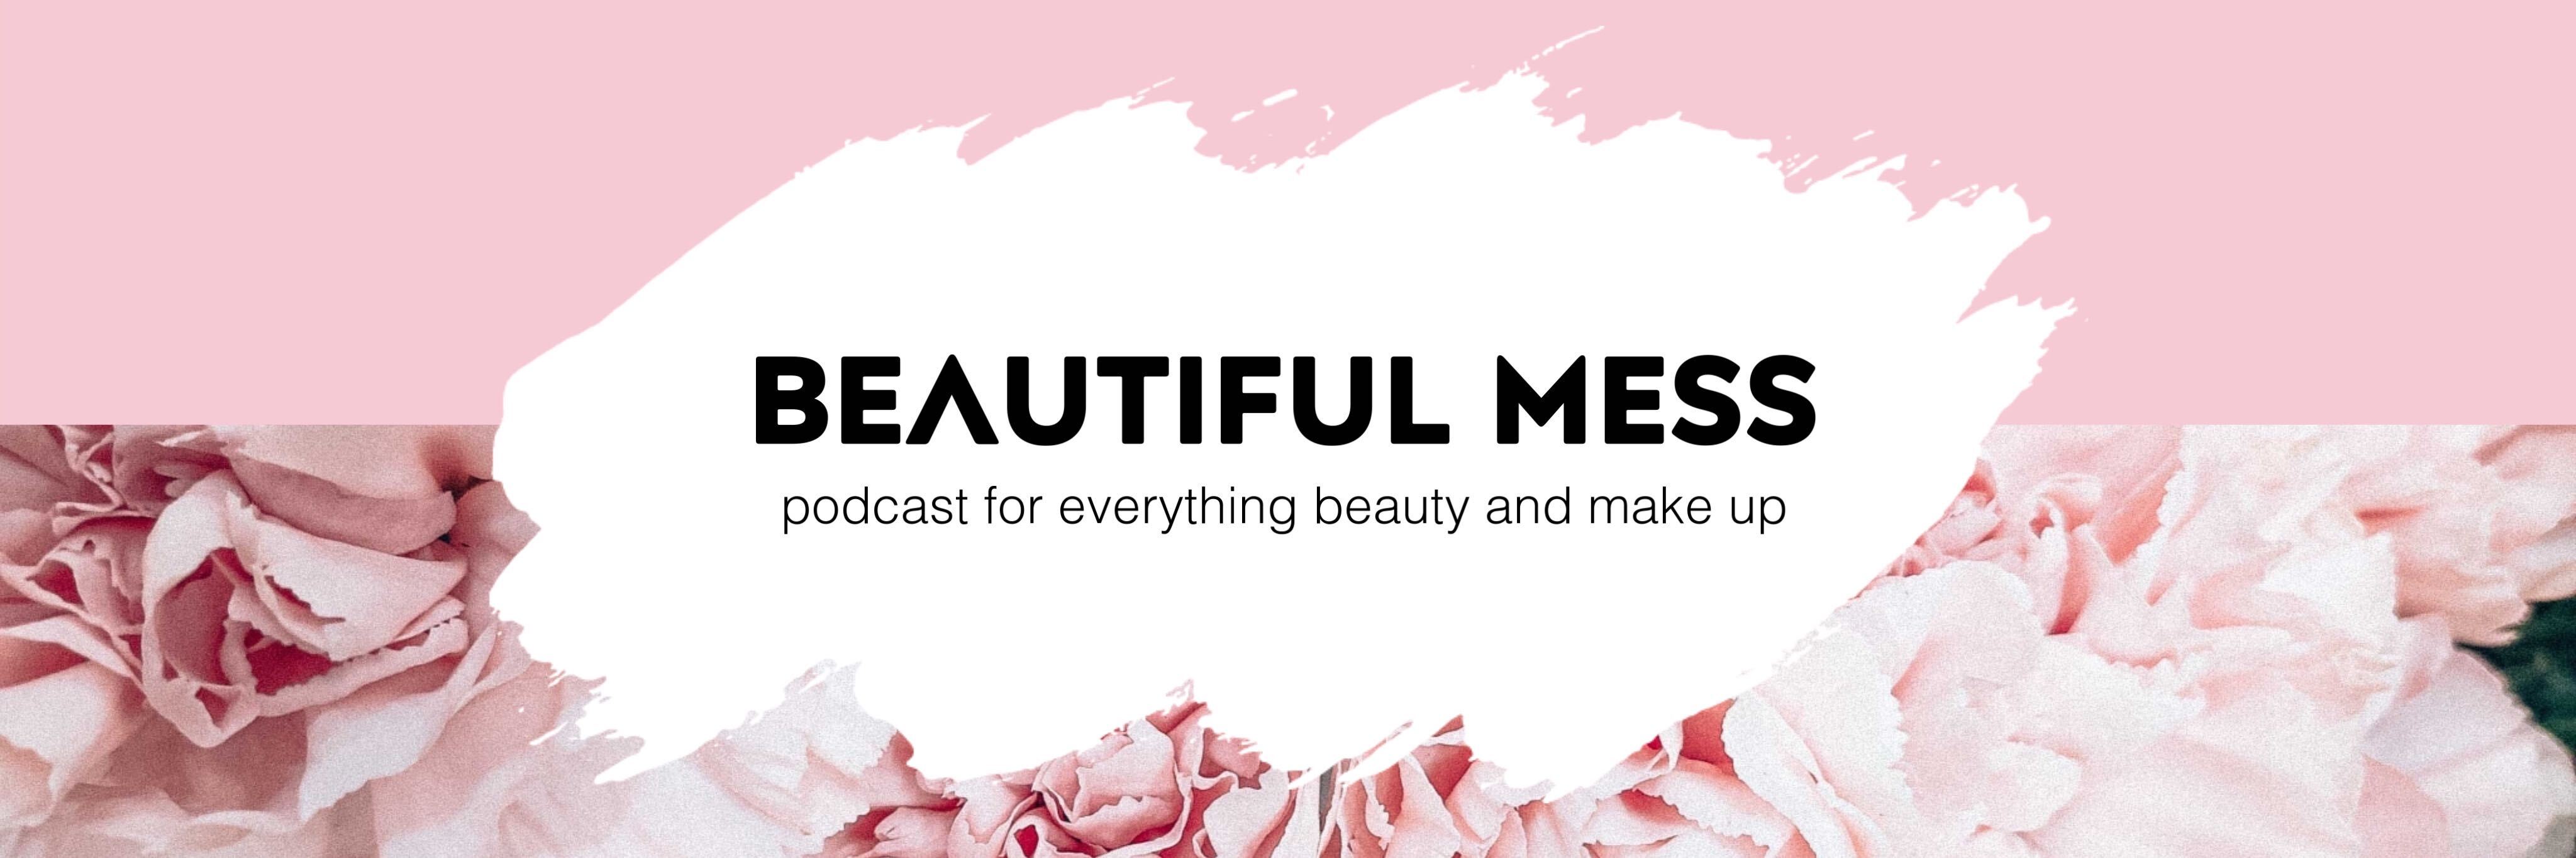 Chic Pink Beauty Podcast Post Design